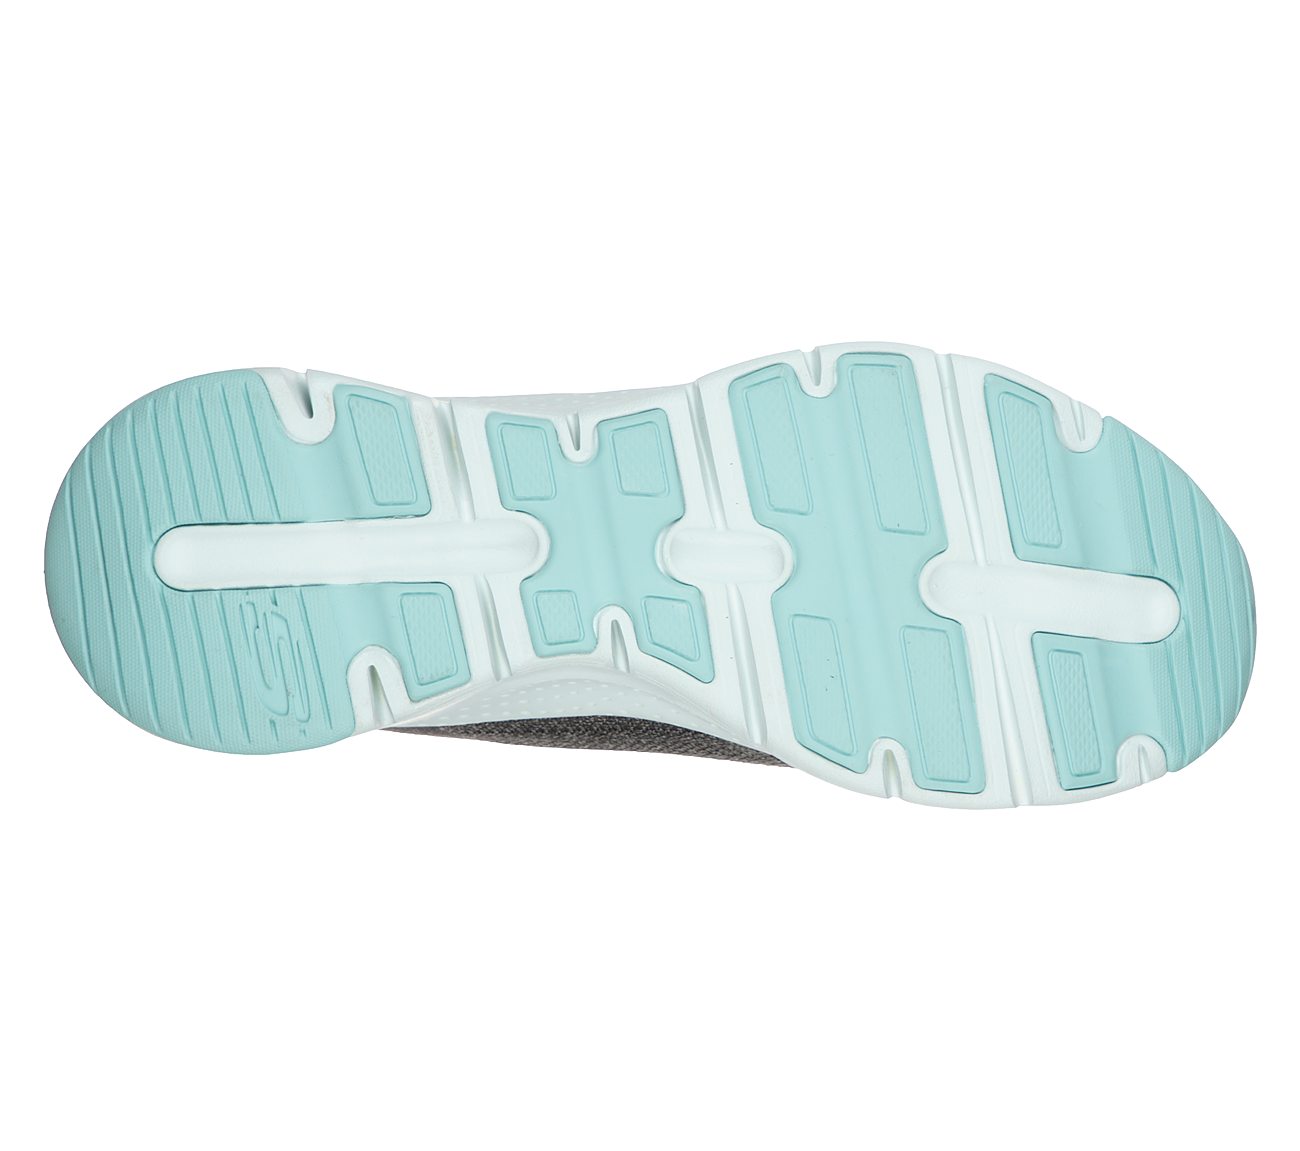 ARCH FIT-COMFY WAVE, CHARCOAL/TURQUOISE Footwear Bottom View